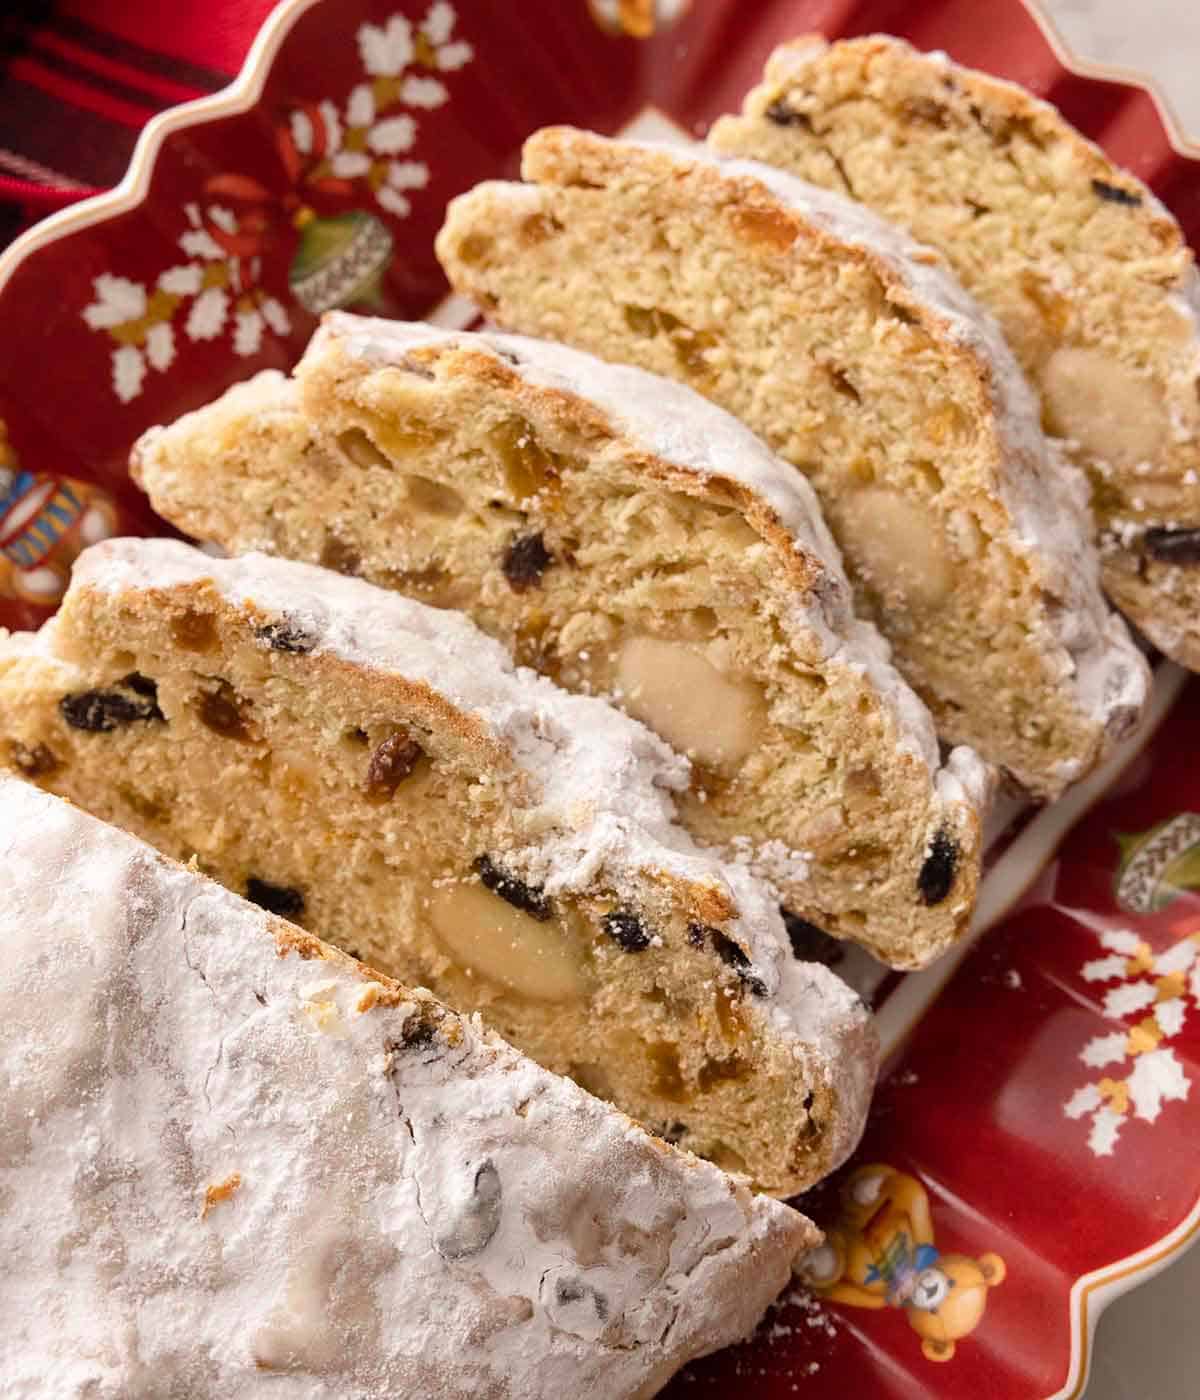 A loaf of stollen, sliced, showing the inside dotted with rum soaked fruit.